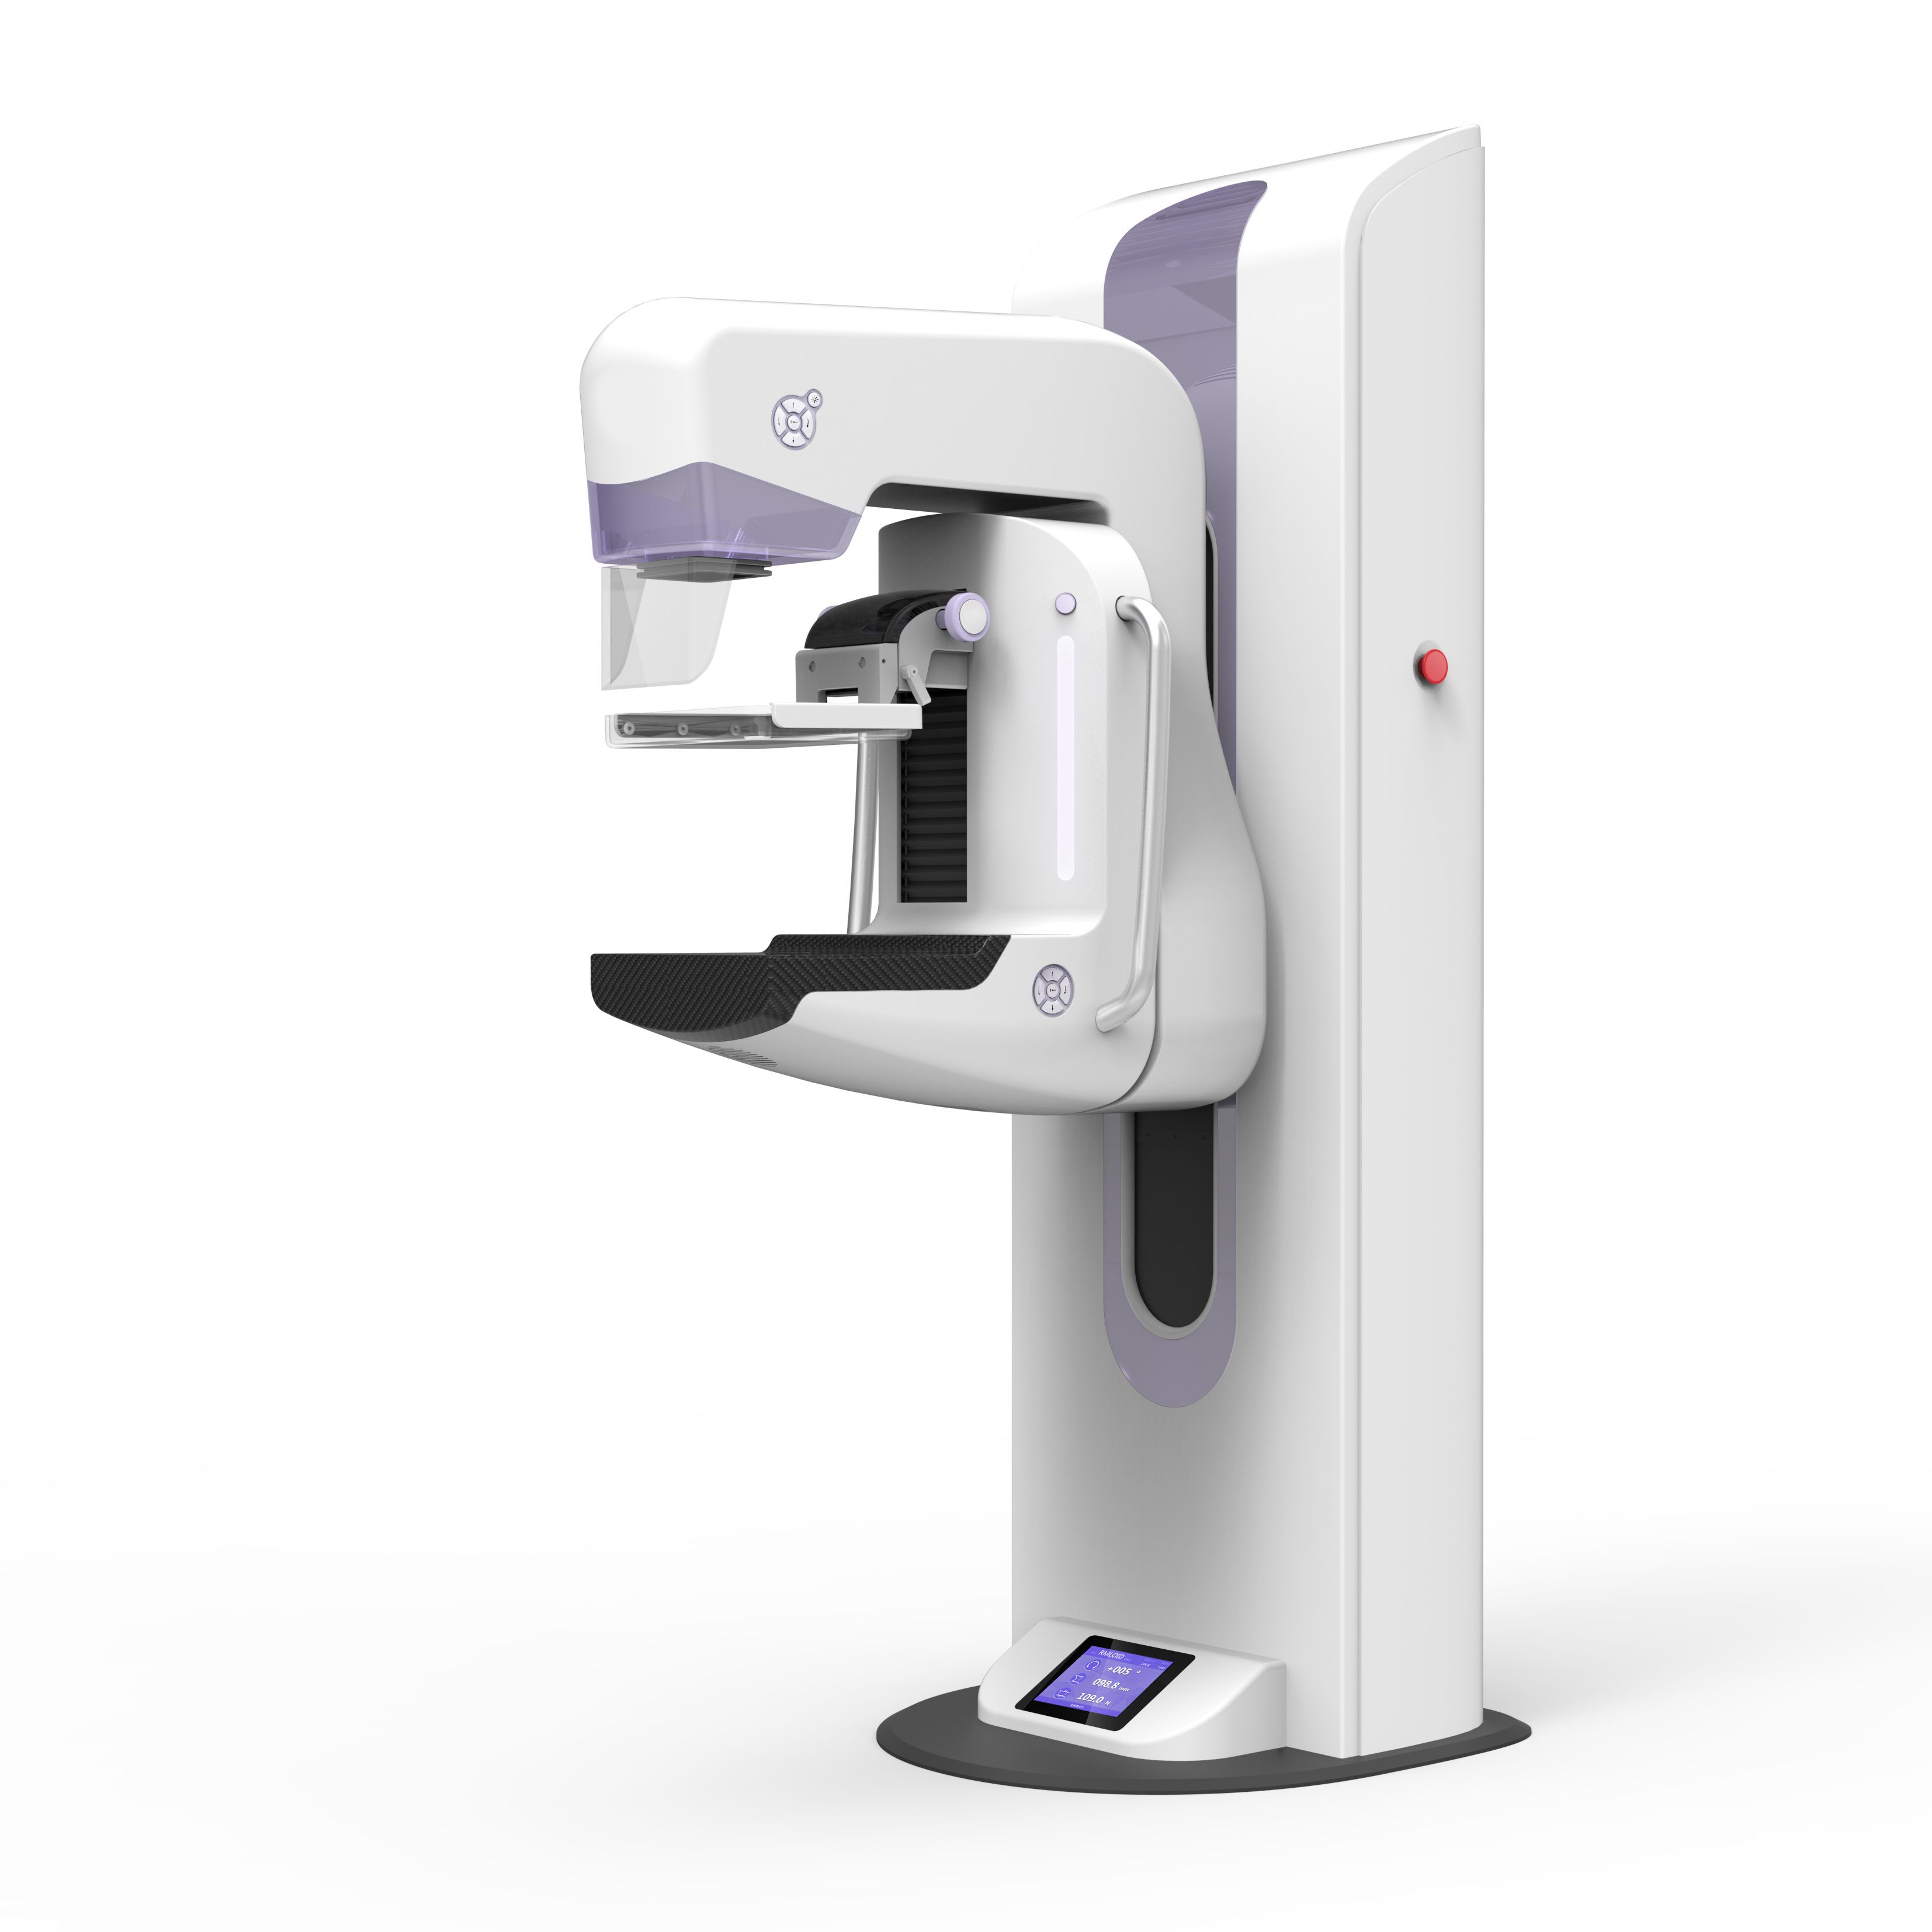 Mammography Equipment Market by Product (Analog Systems, Breast Tomosynthesis System, Full Field Digital Mammography System), by Technology (Screen Film, 2D Mammography, 3D Mammography), and by End-User (Hospitals, Ambulatory Centers, Diagnostic Centers) – Global Outlook & Forecast 2022-2030